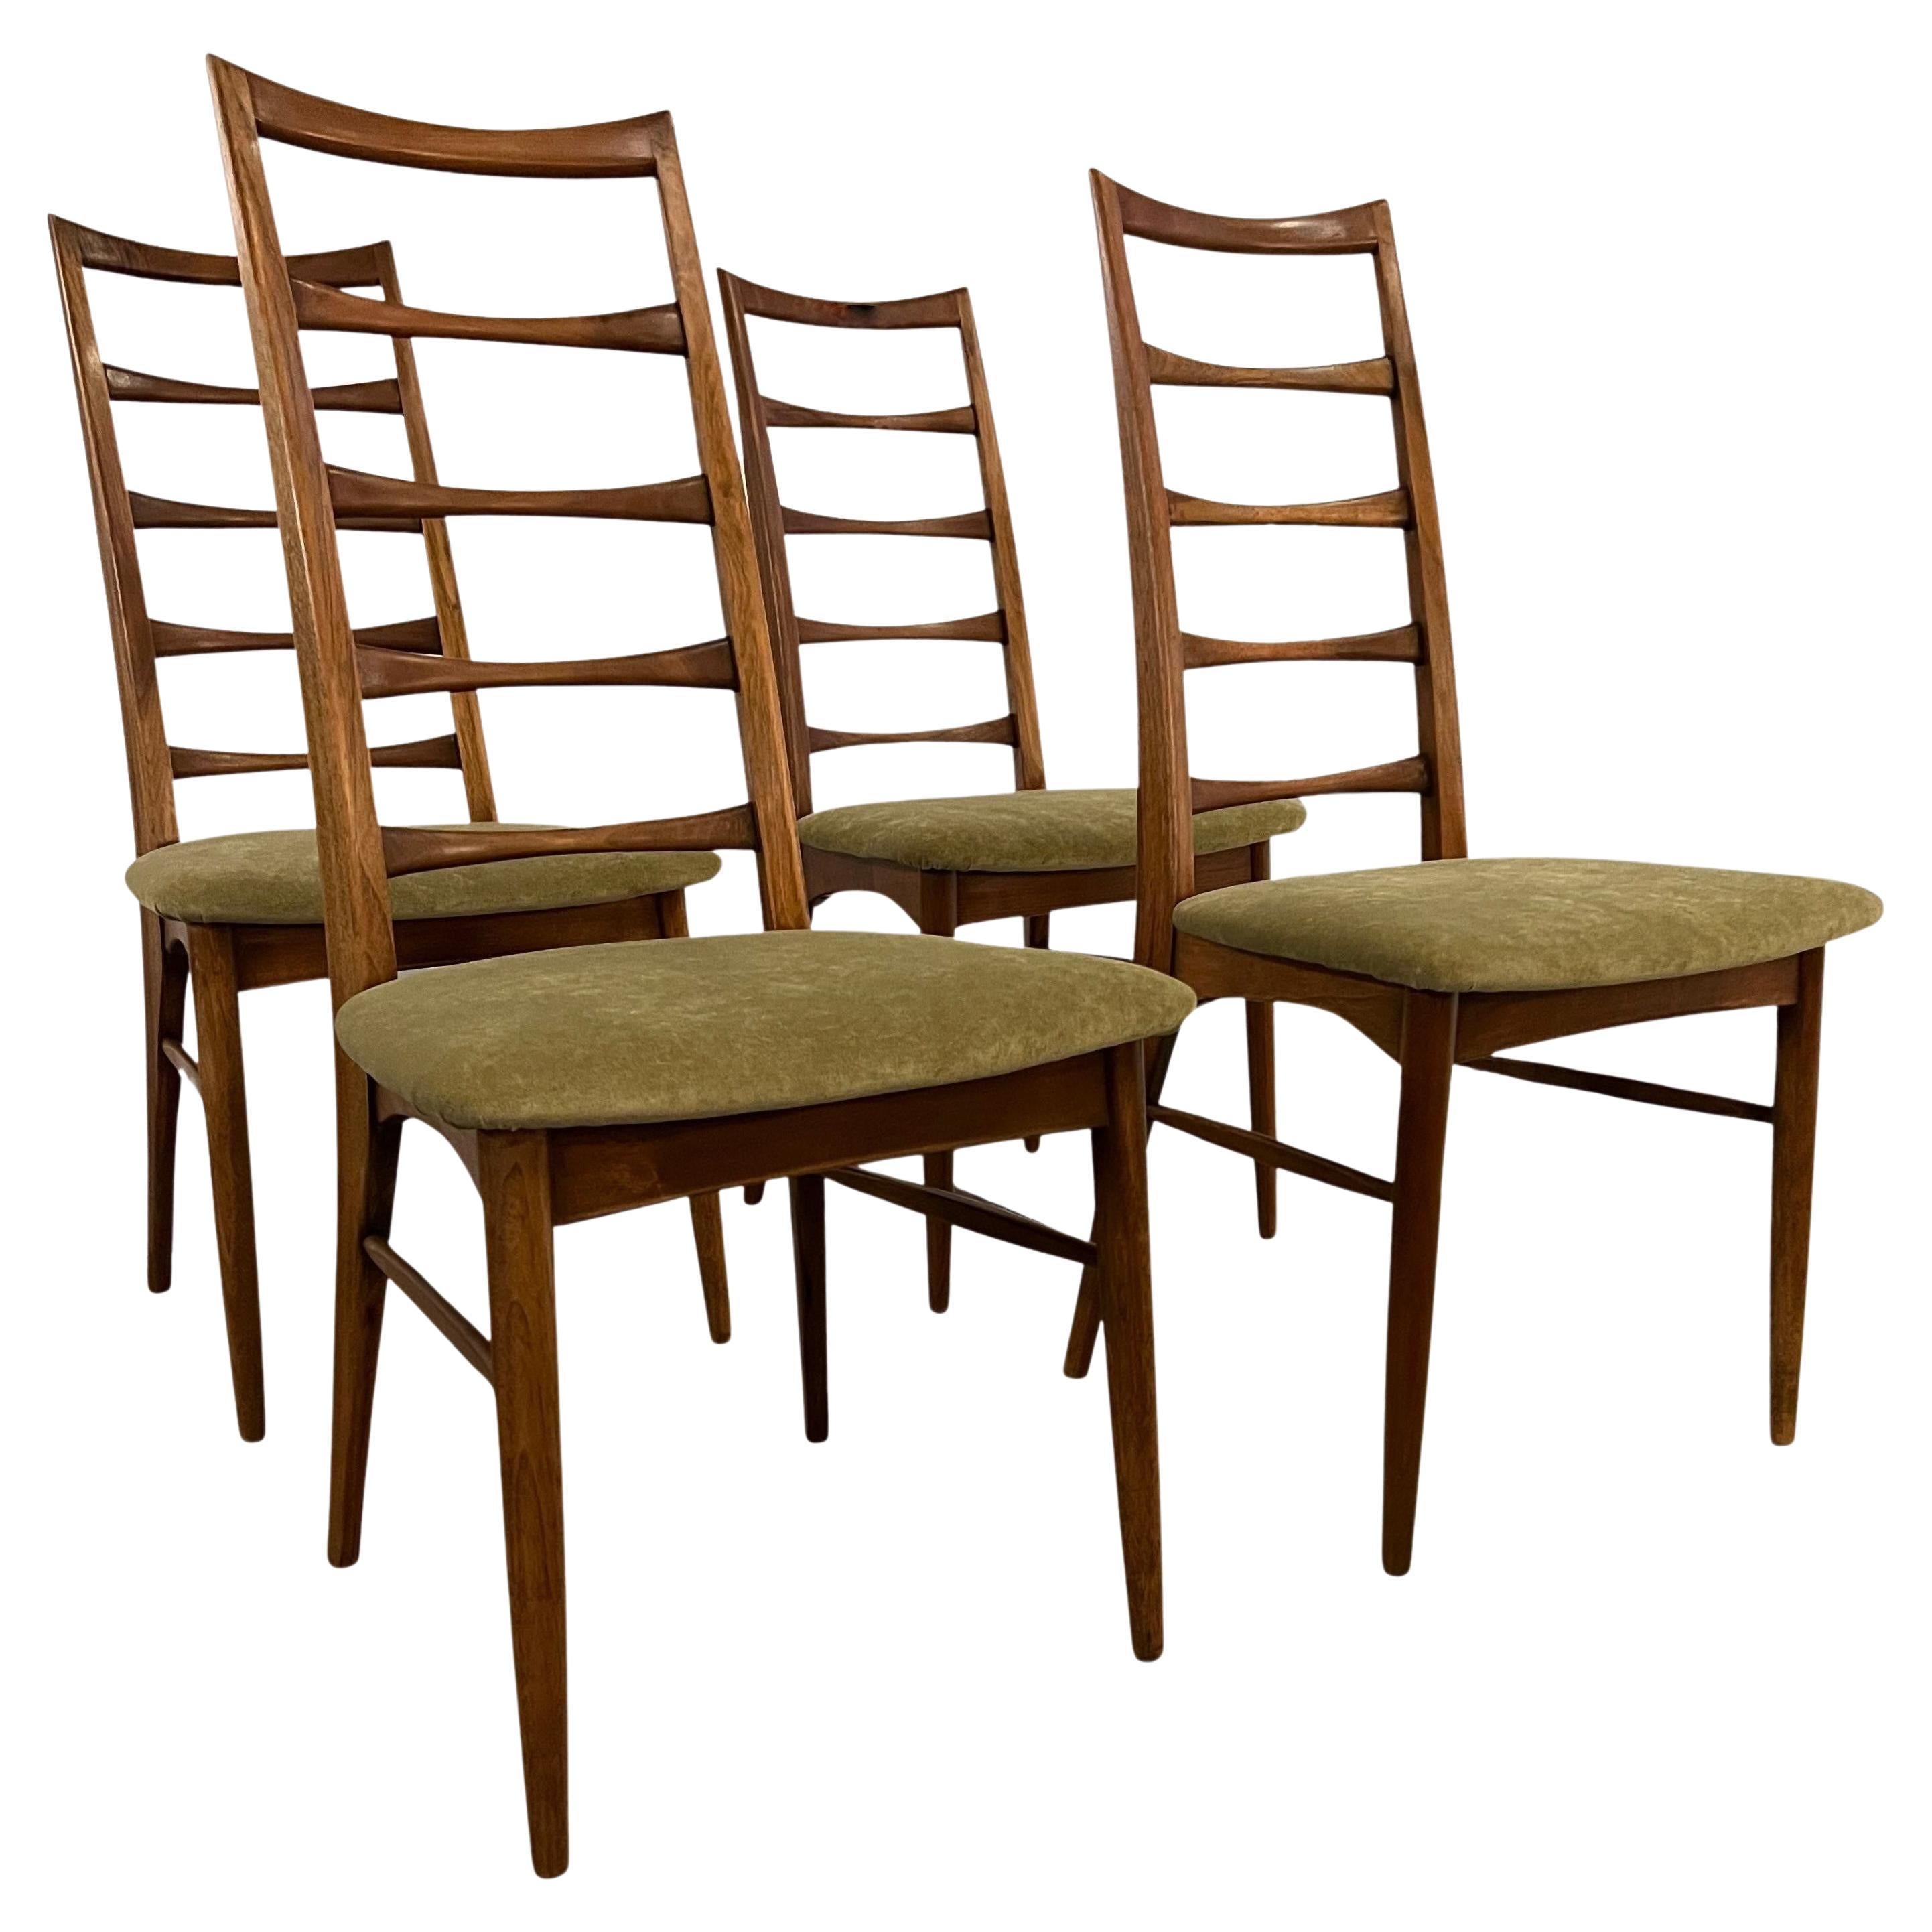 Set of 4 Ladder Back Dining Chairs by Niels Koefoed